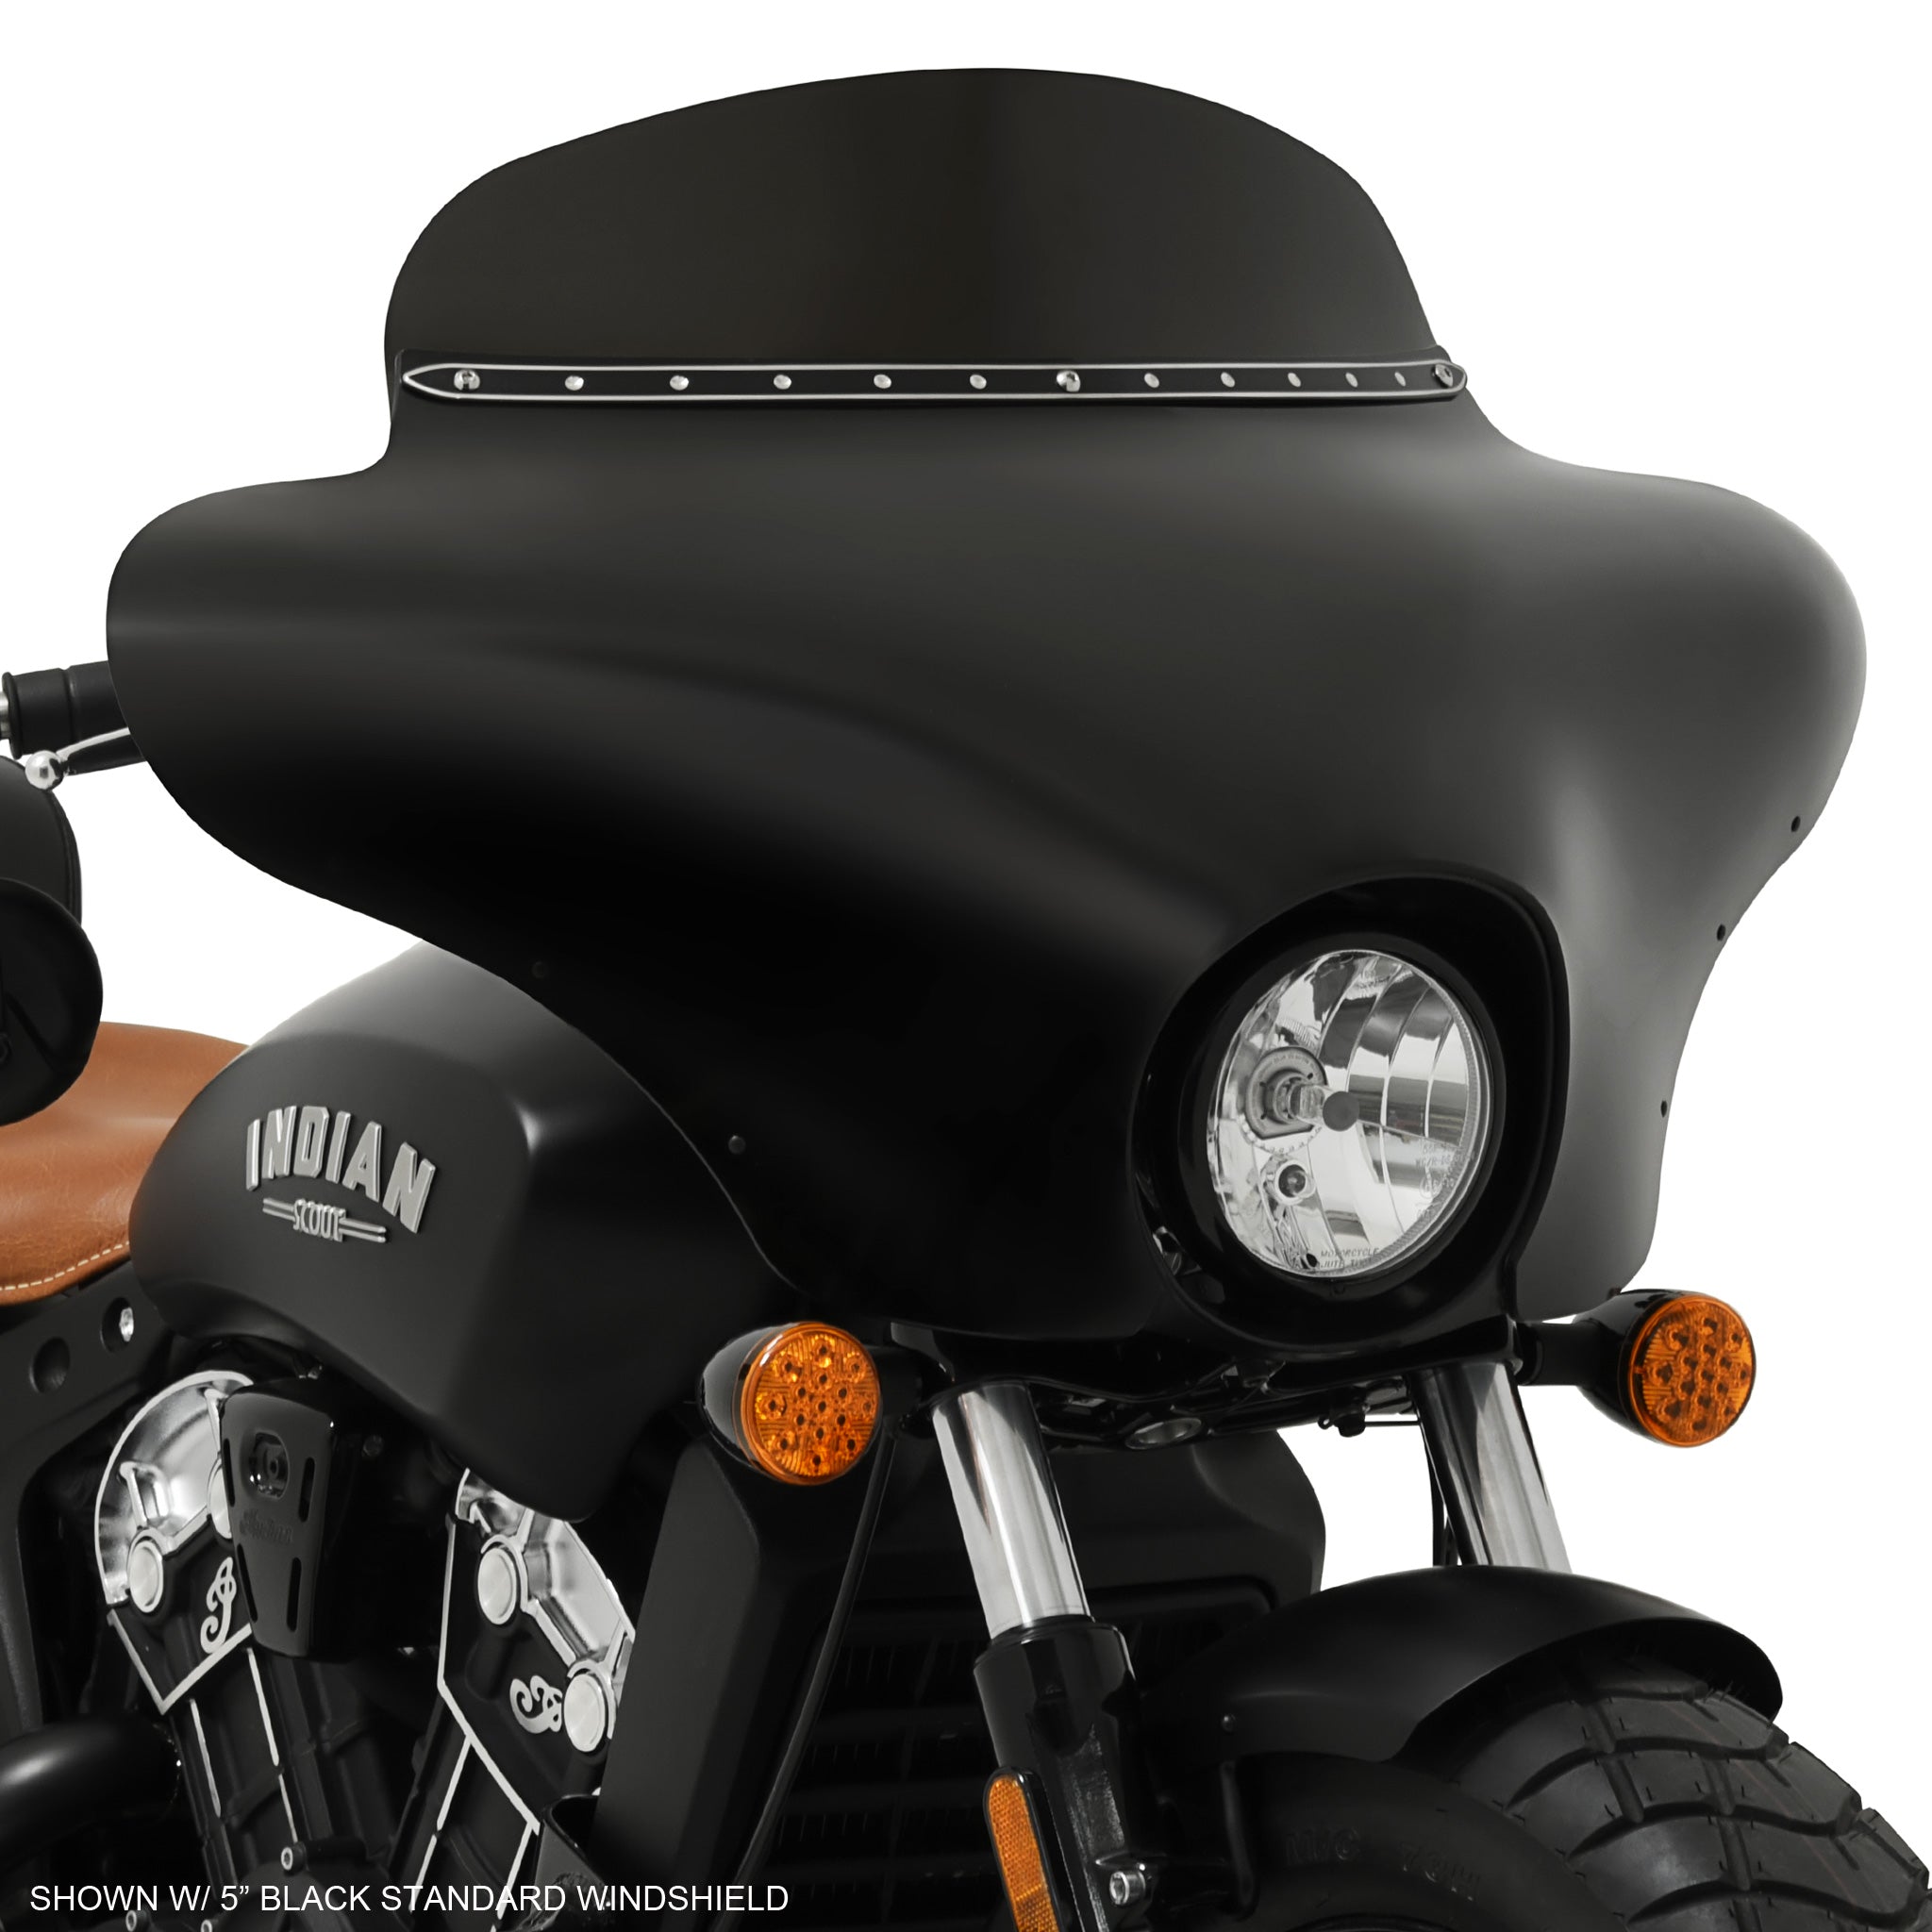 Batwing Fairing on a 2018 Indian Scout Bobber